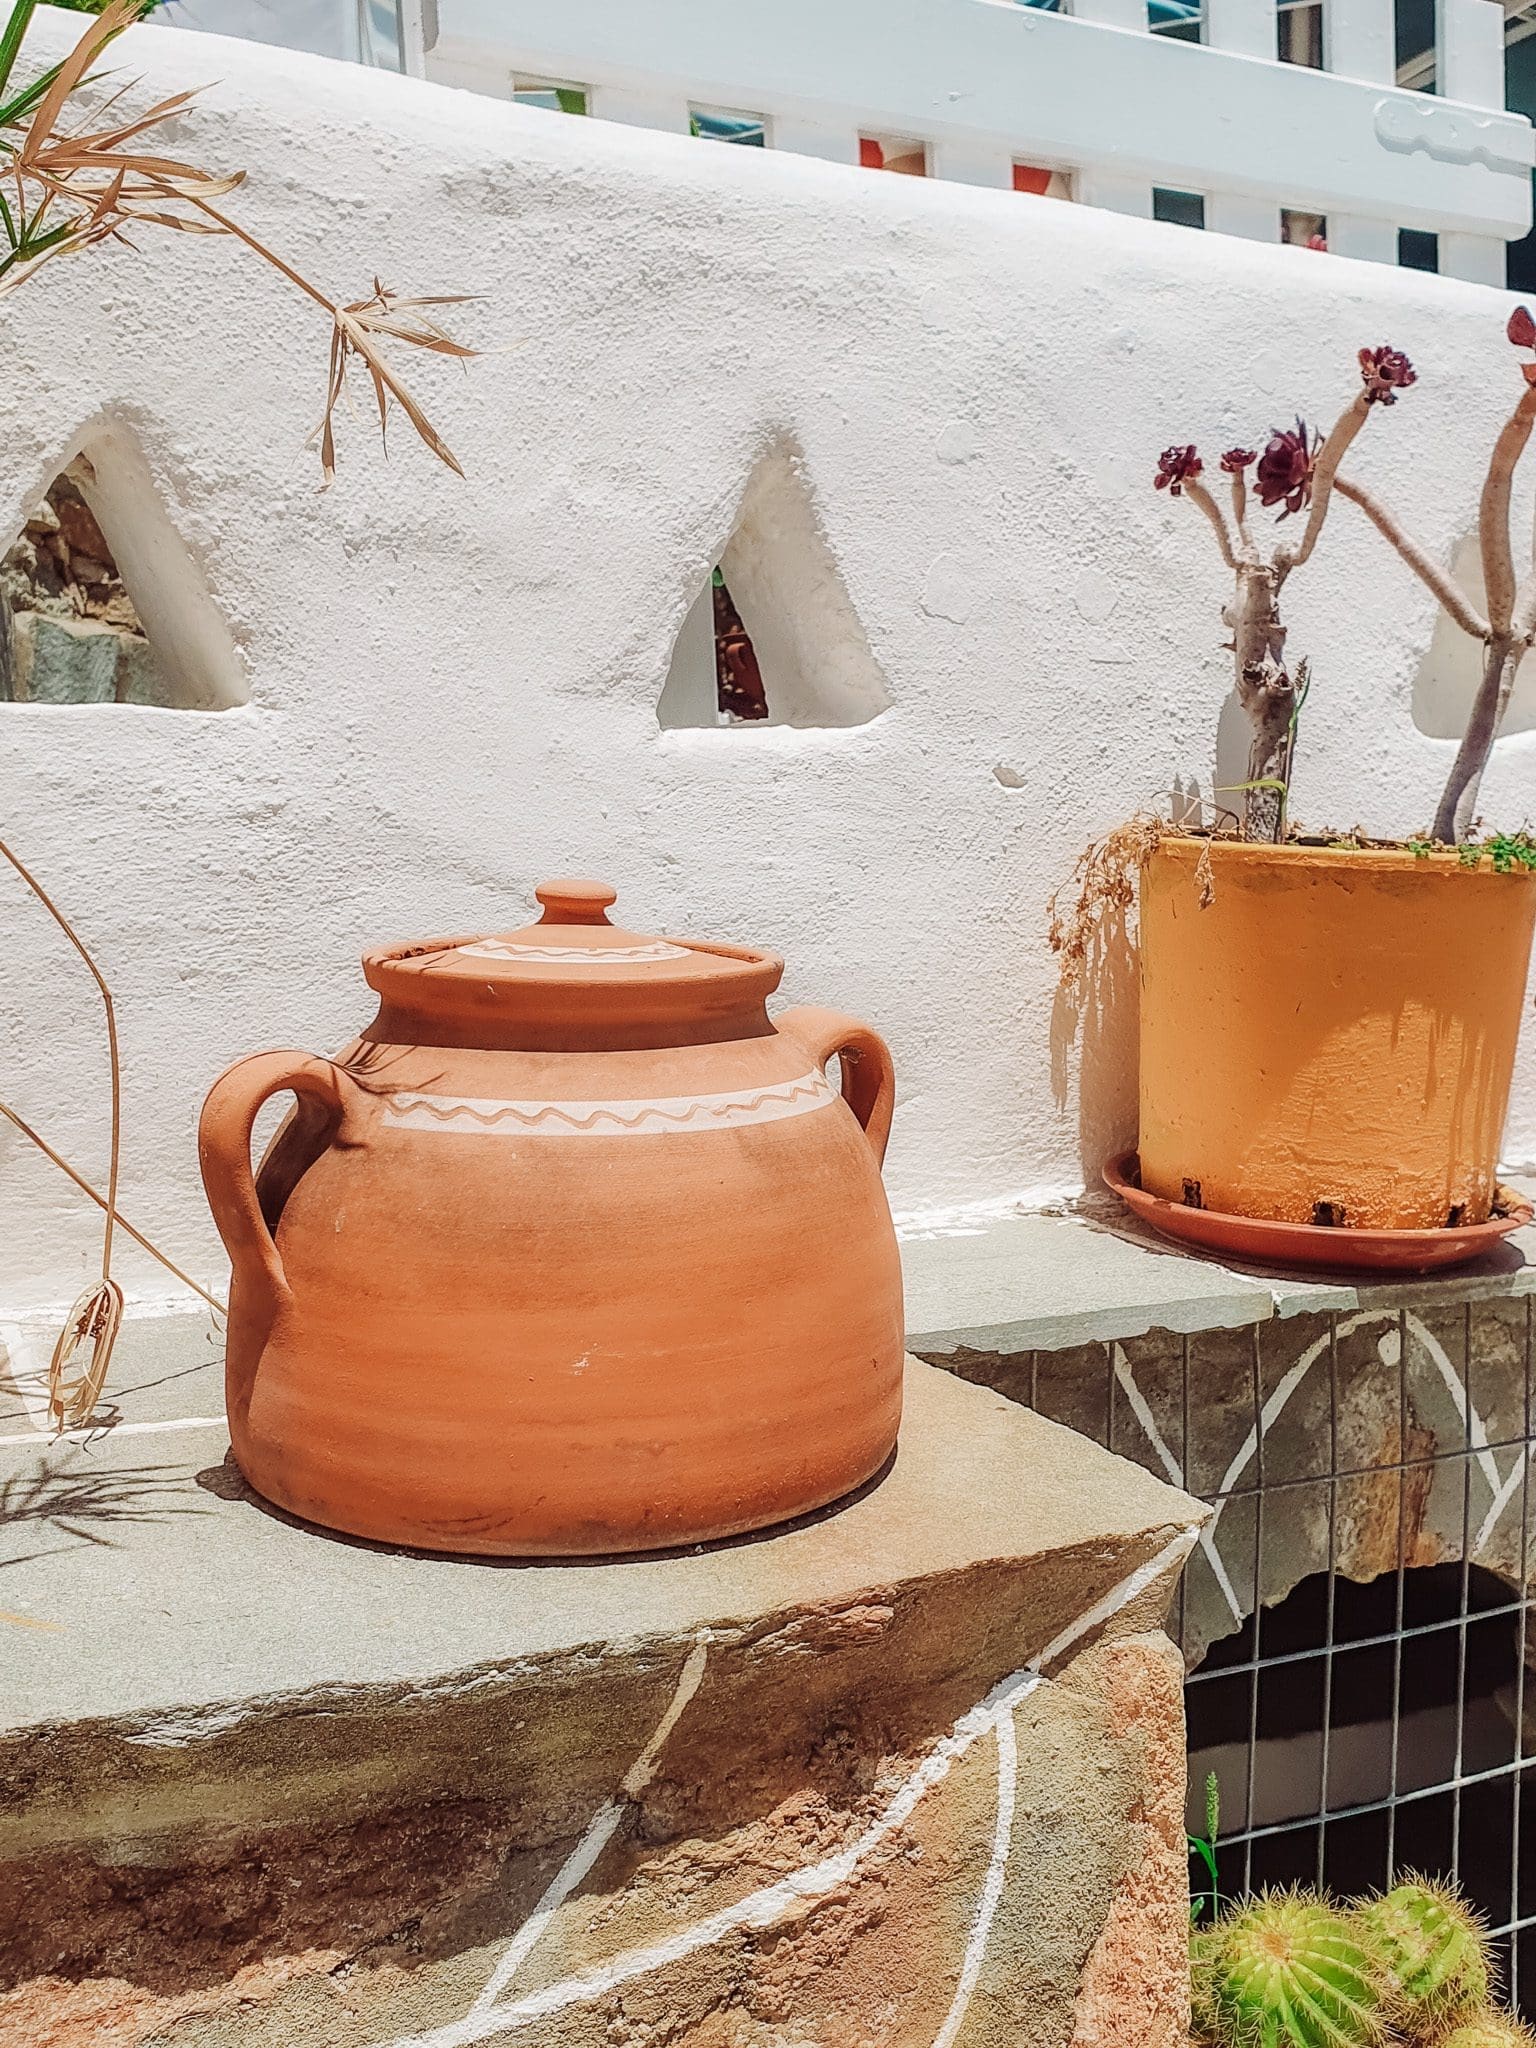 pottery at Sifnos